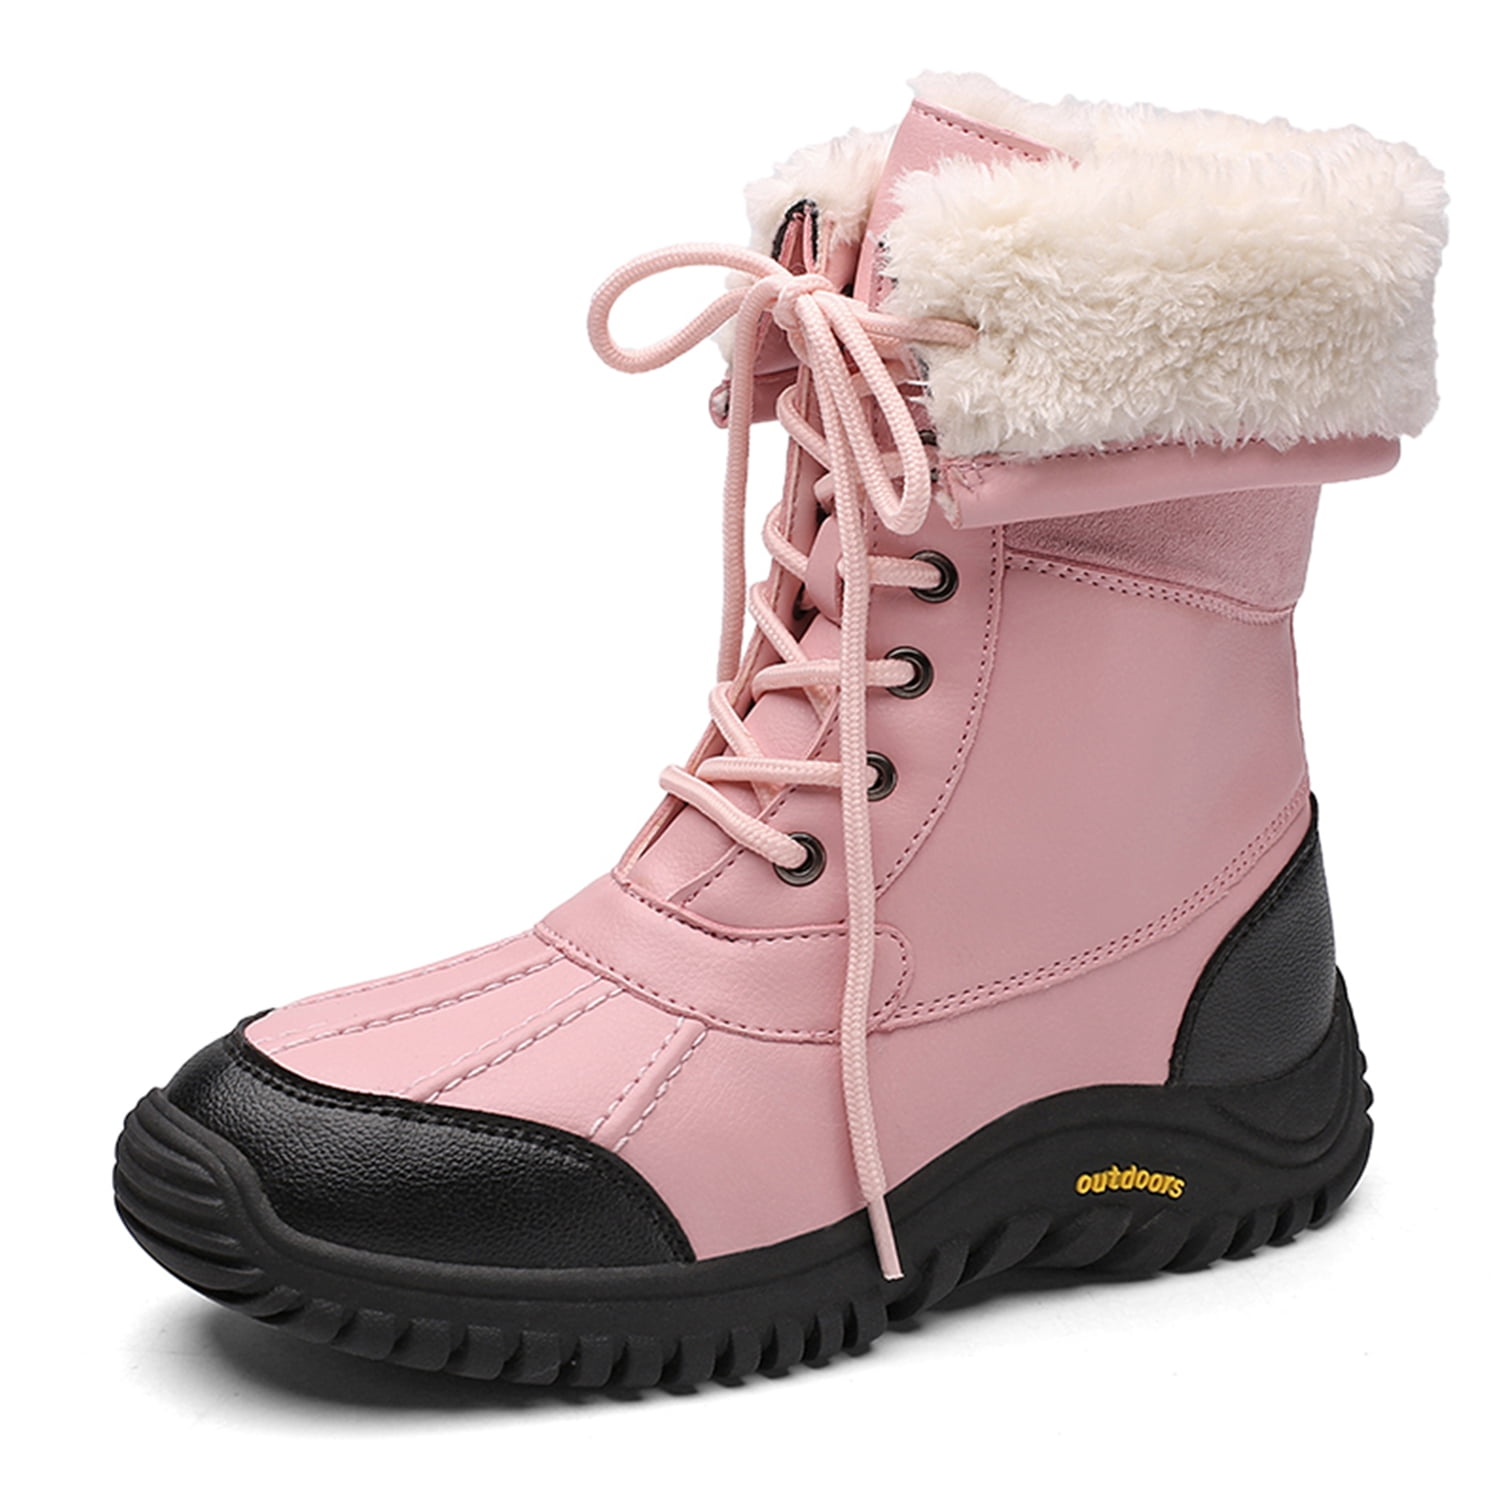 Women Non-slip Cotton Thick Fleece Lined Snow Boots Winter Warm Waterproof Shoes 